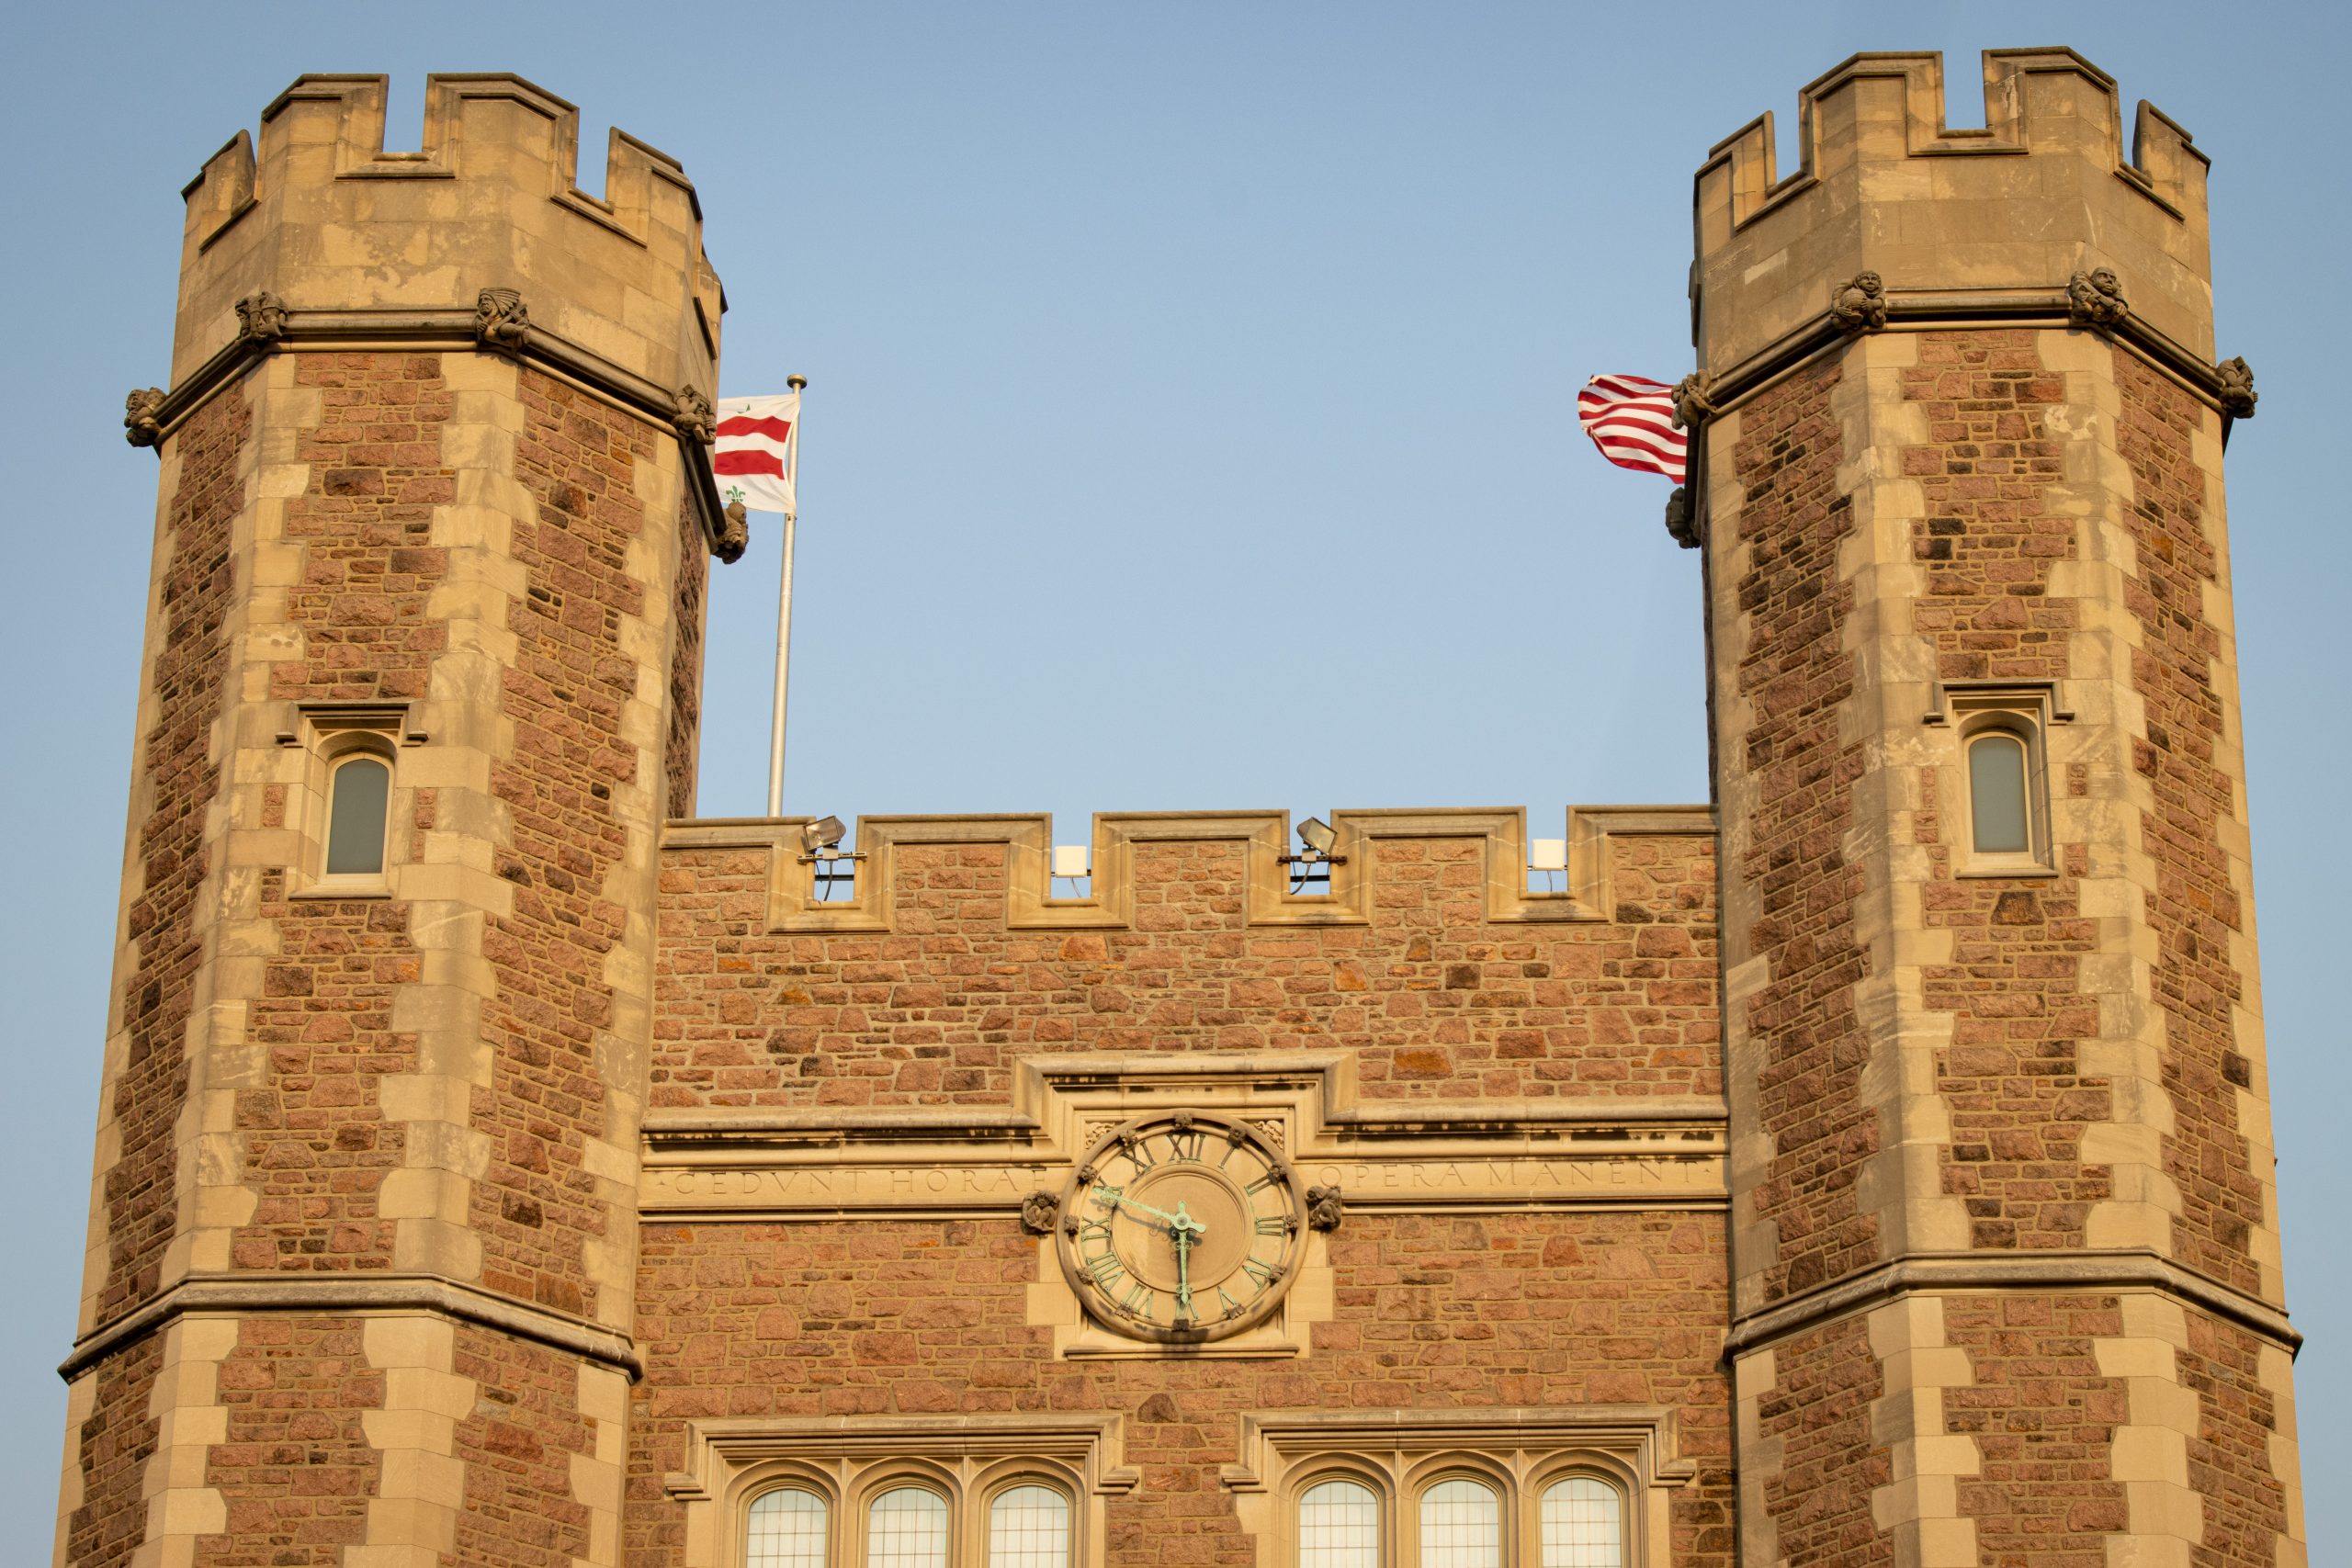 A red brick facade of a building with two round towers stands in front of a pale blue sky. A clockface and windows can be seen in the center of the building, while two red and white flags can be somewhat seen behind the towers on each side.